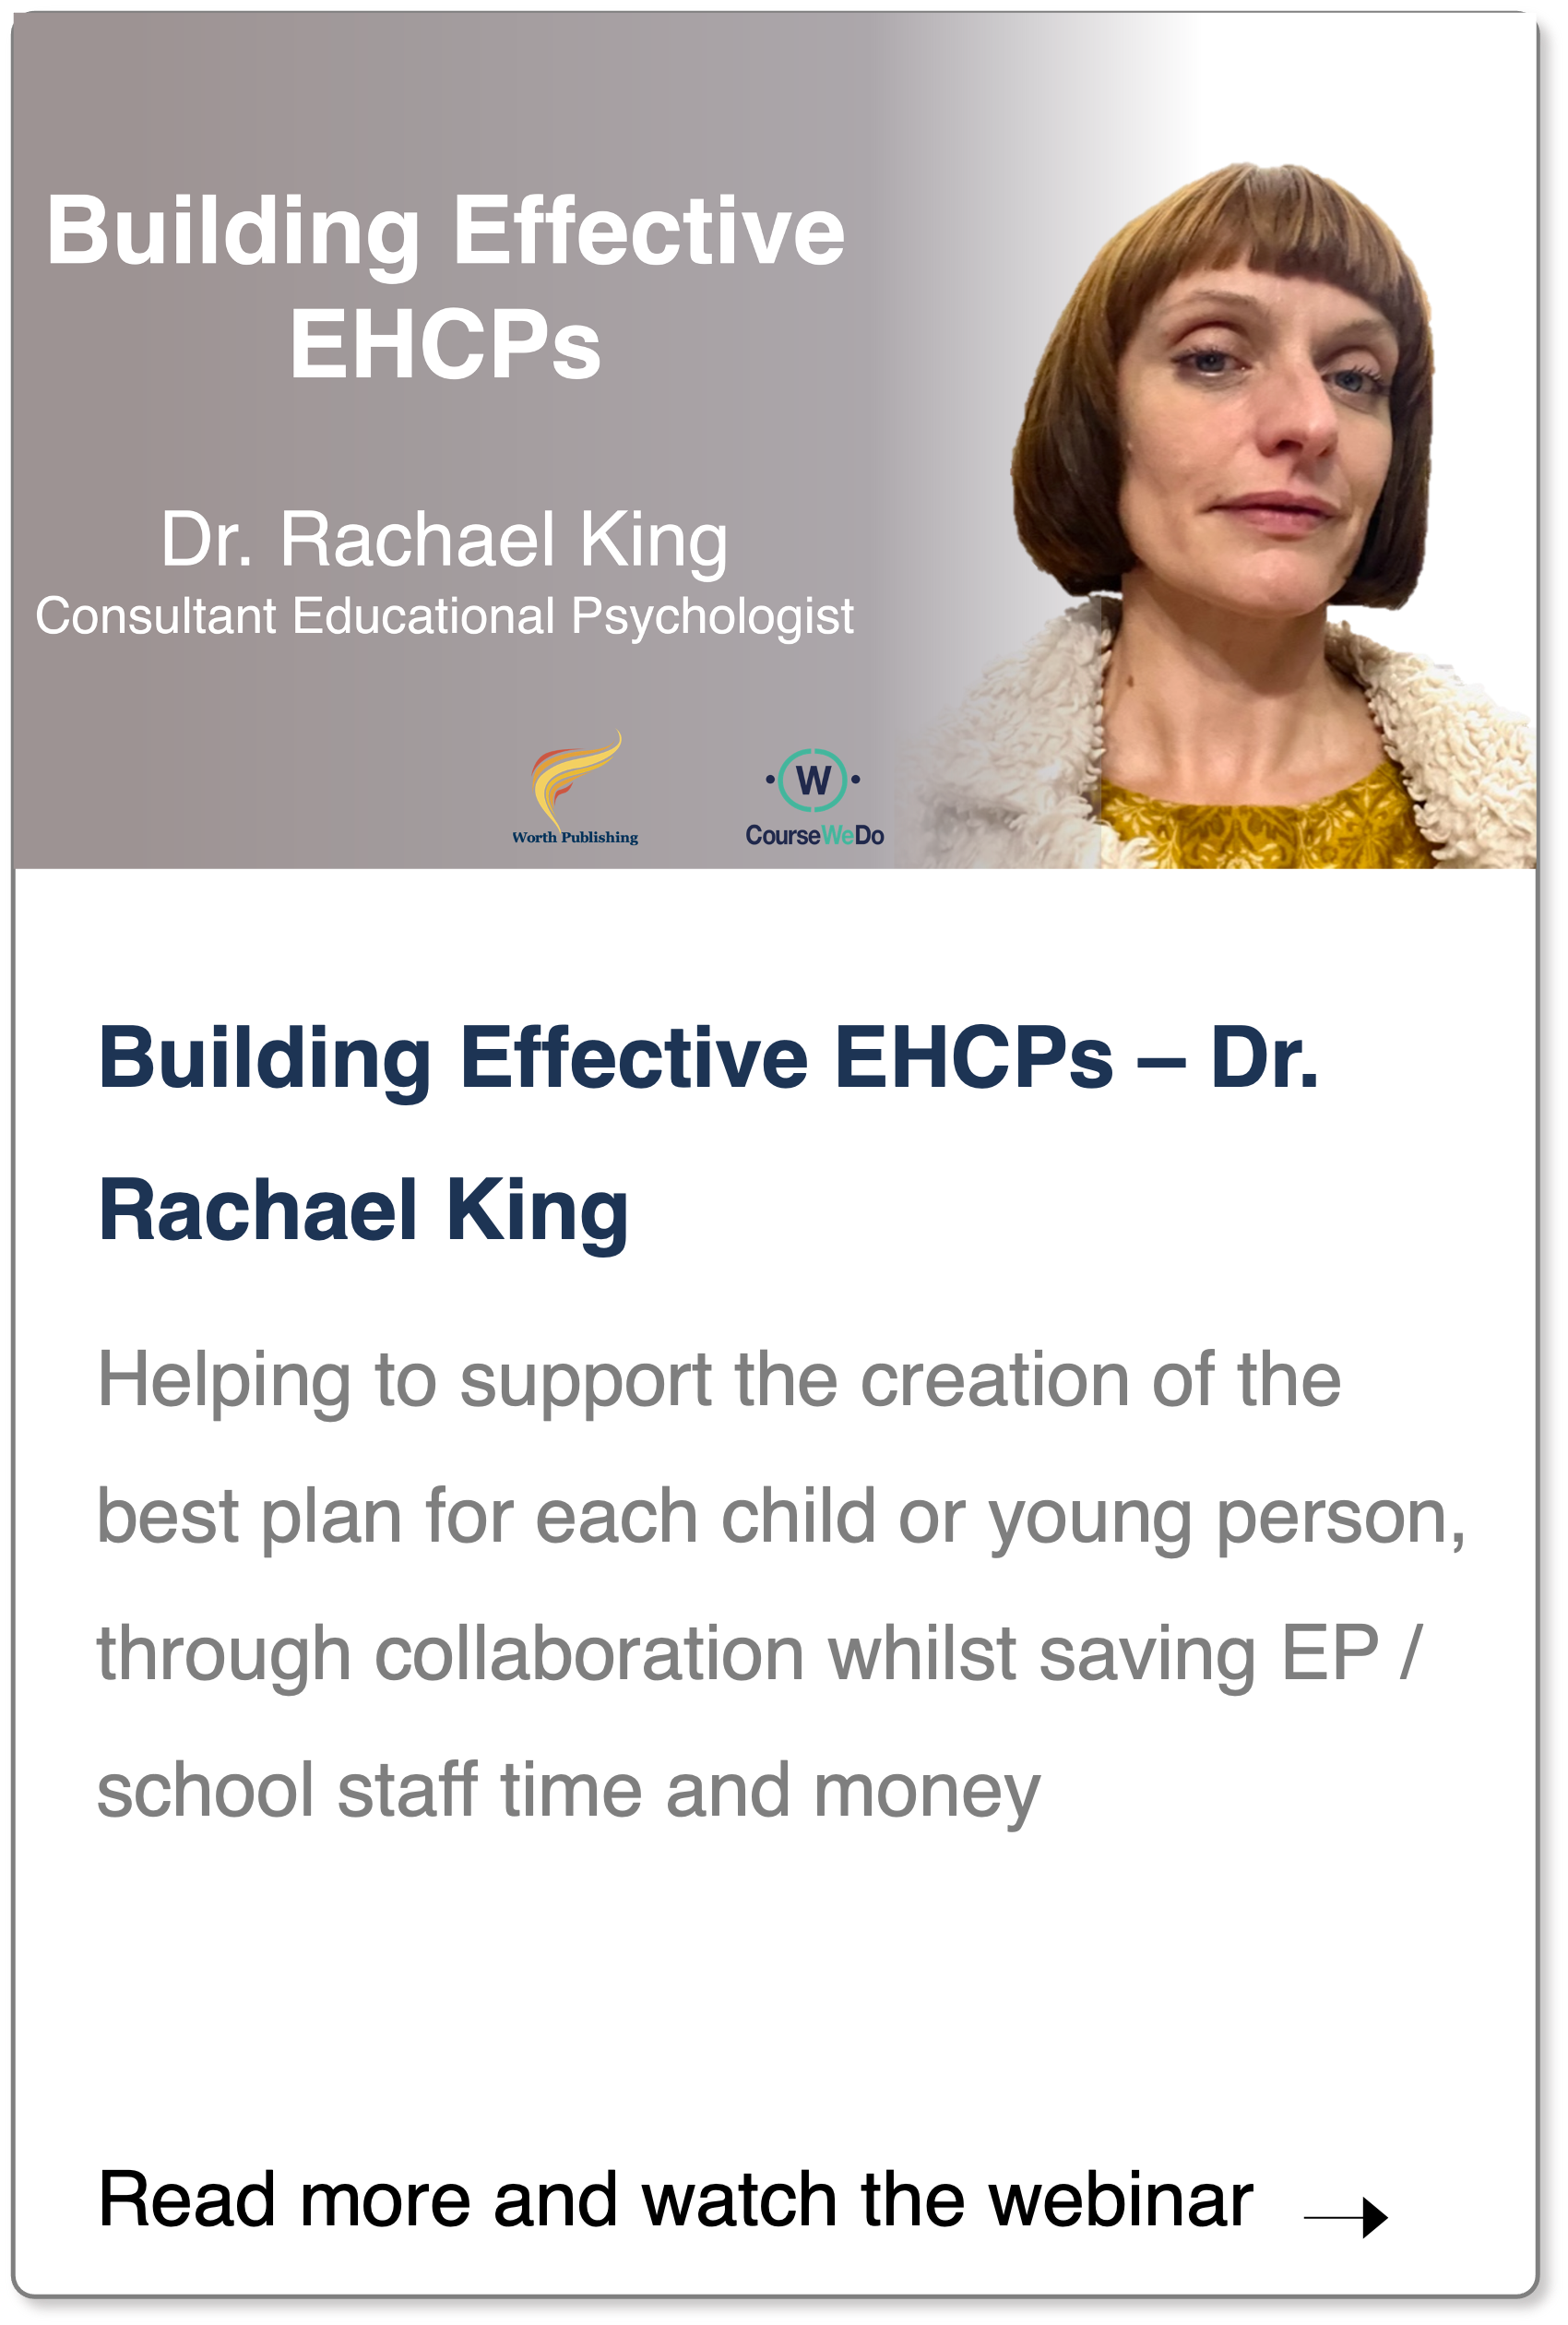 Helping to support the creation of the best plan for each child/young person, through collaboration whilst saving EP/school staff time and money